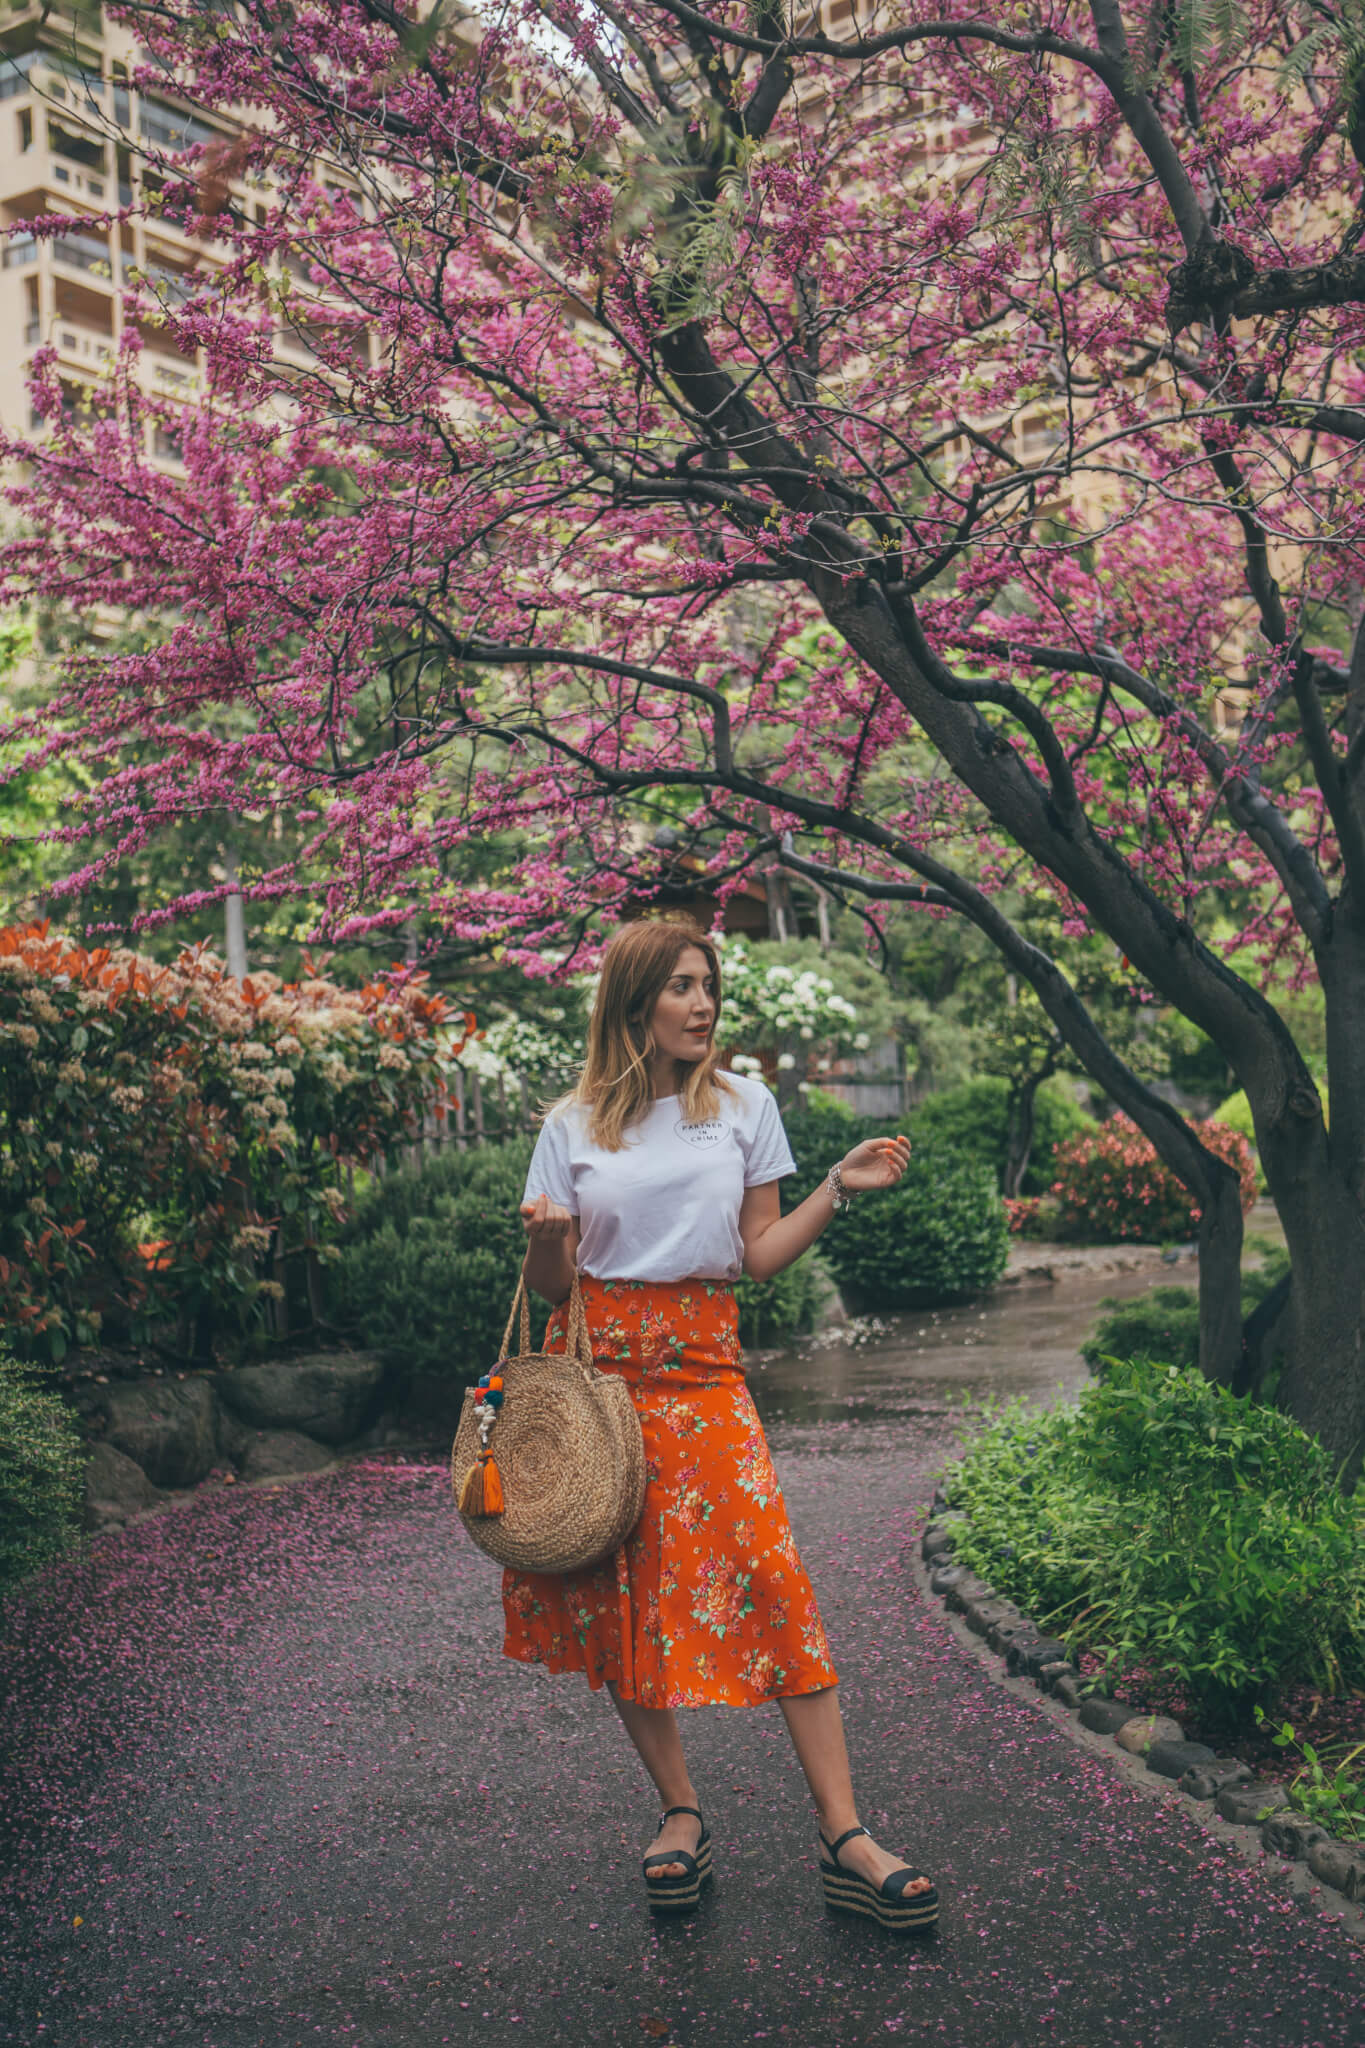 And-Other-Stories-Japanese-Garden-7-of-12-1 Japanese Garden Monaco - What I Wore